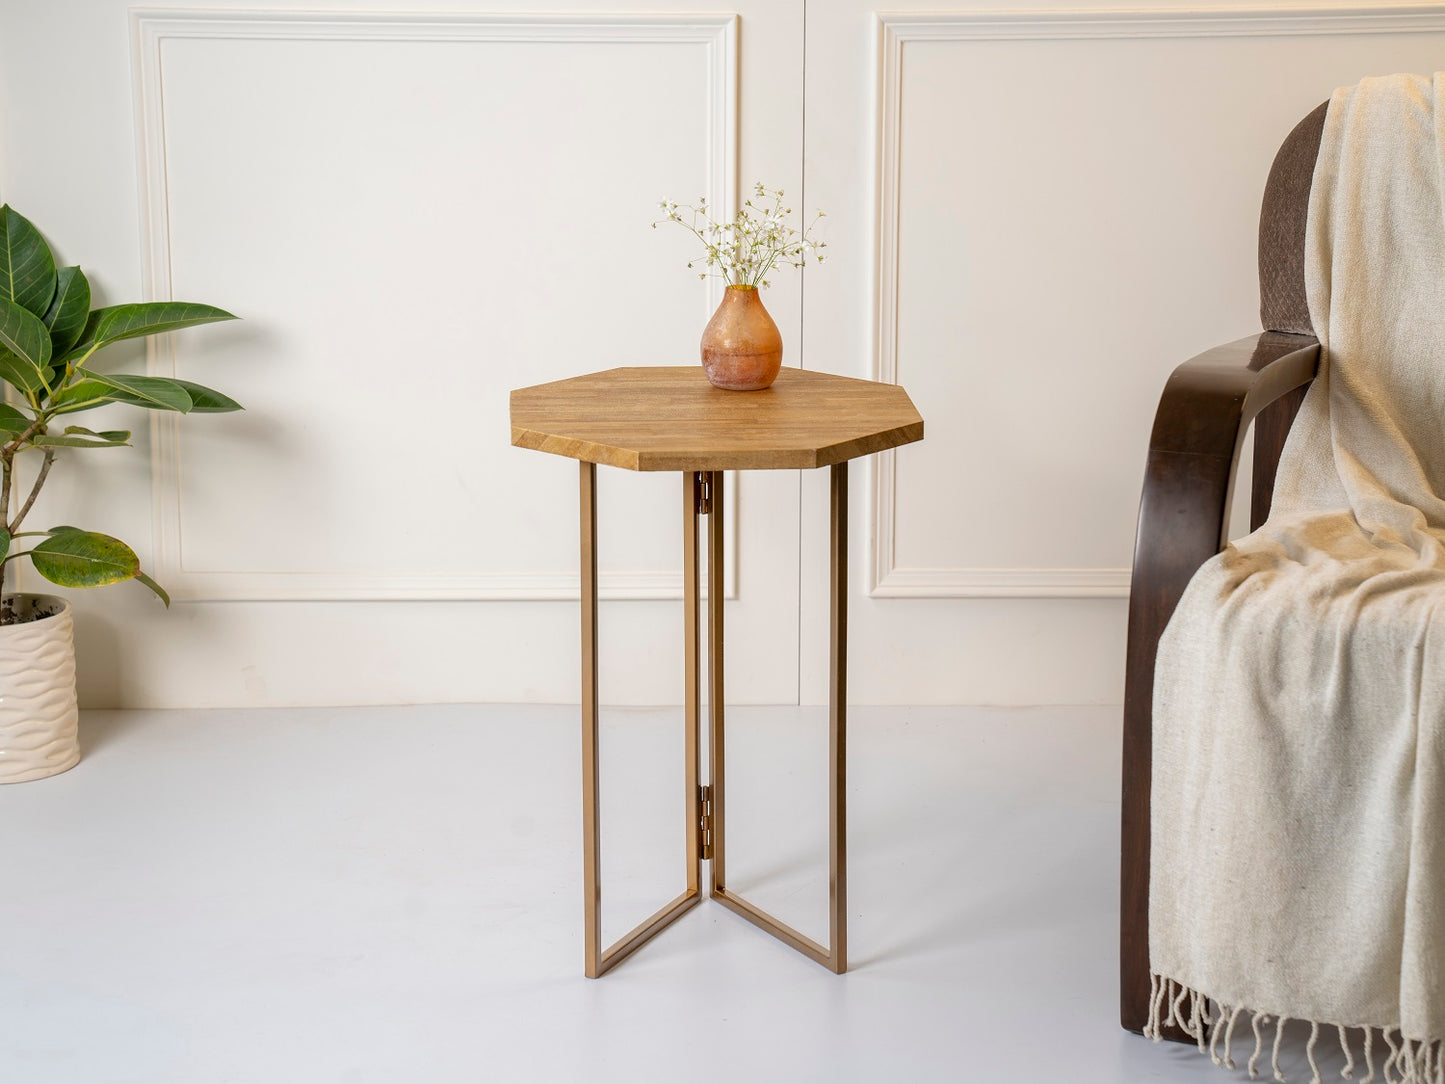 Gold Stacks Octagon Oblique Side Tables, Wooden Tables, Living Room Decor by A Tiny Mistake